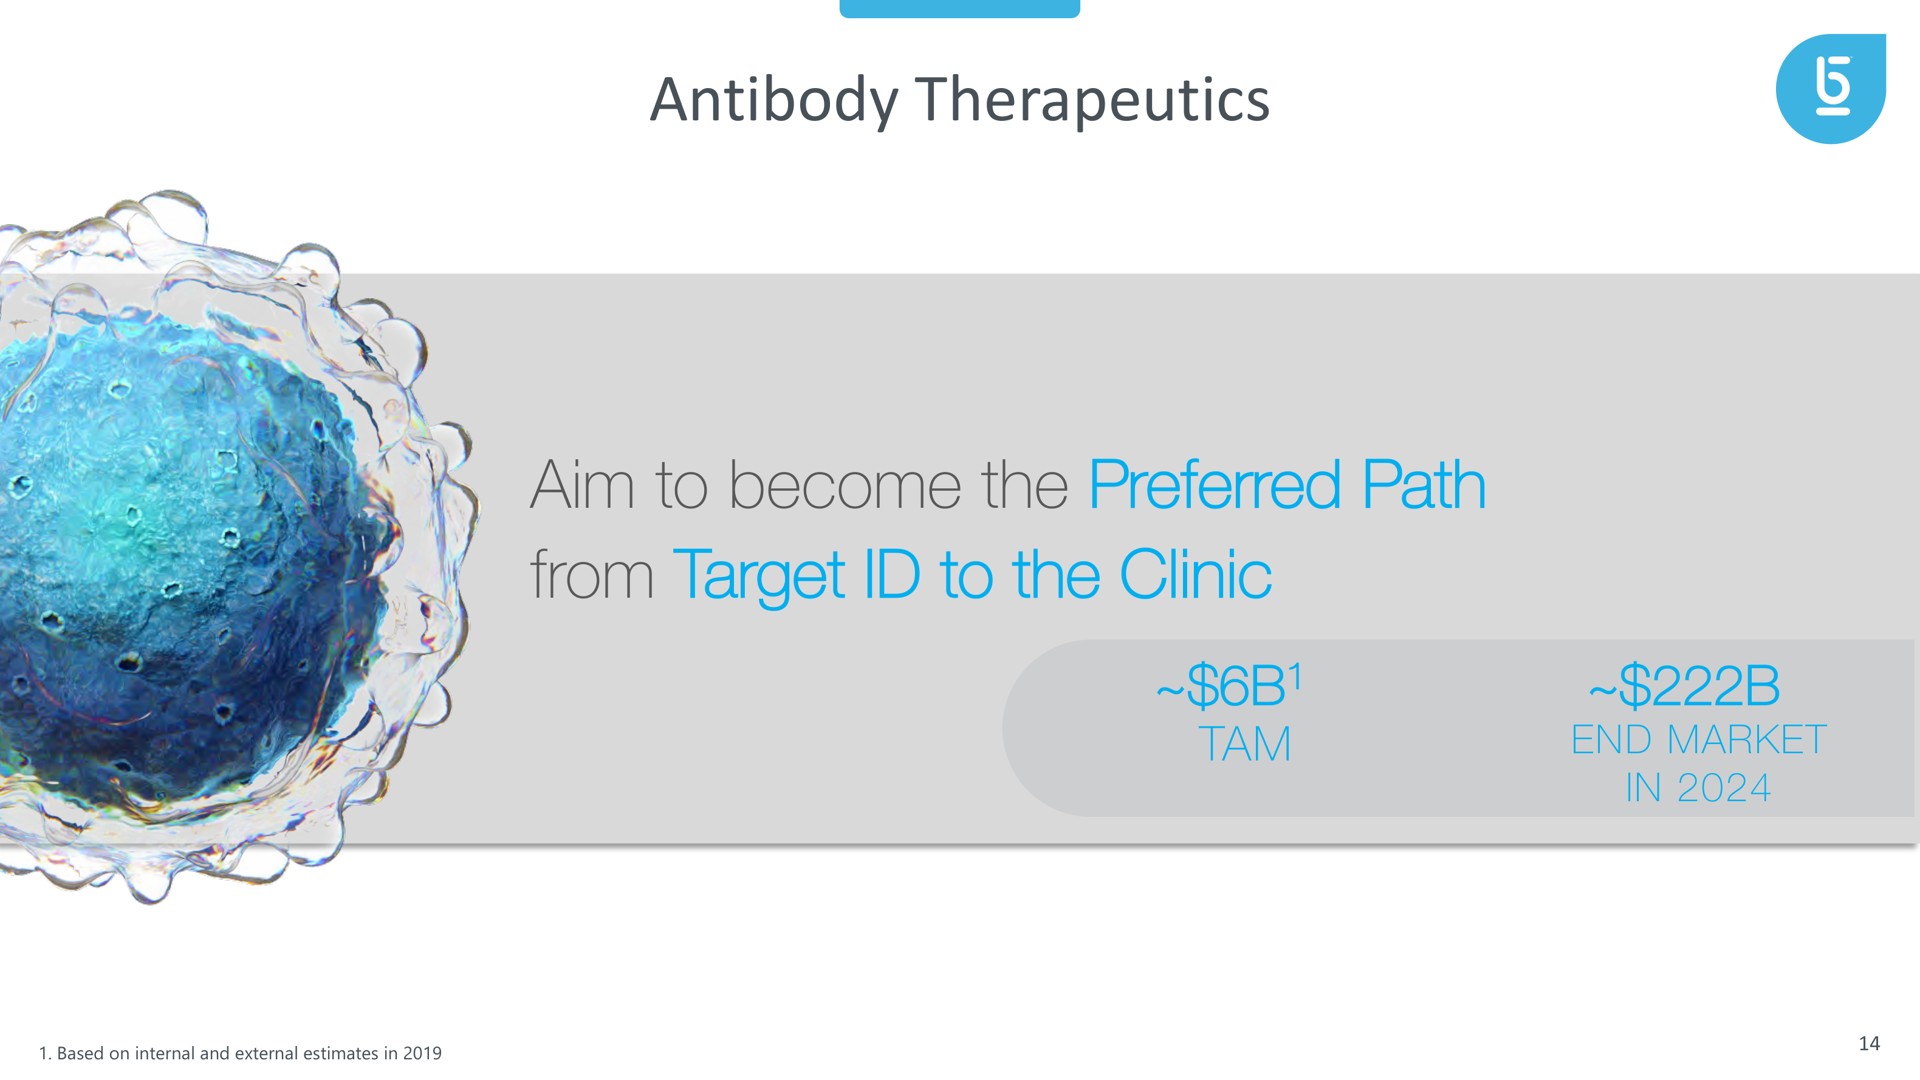 antibody therapeutics aim to become the preferred path from target to the clinic | Berkeley Lights